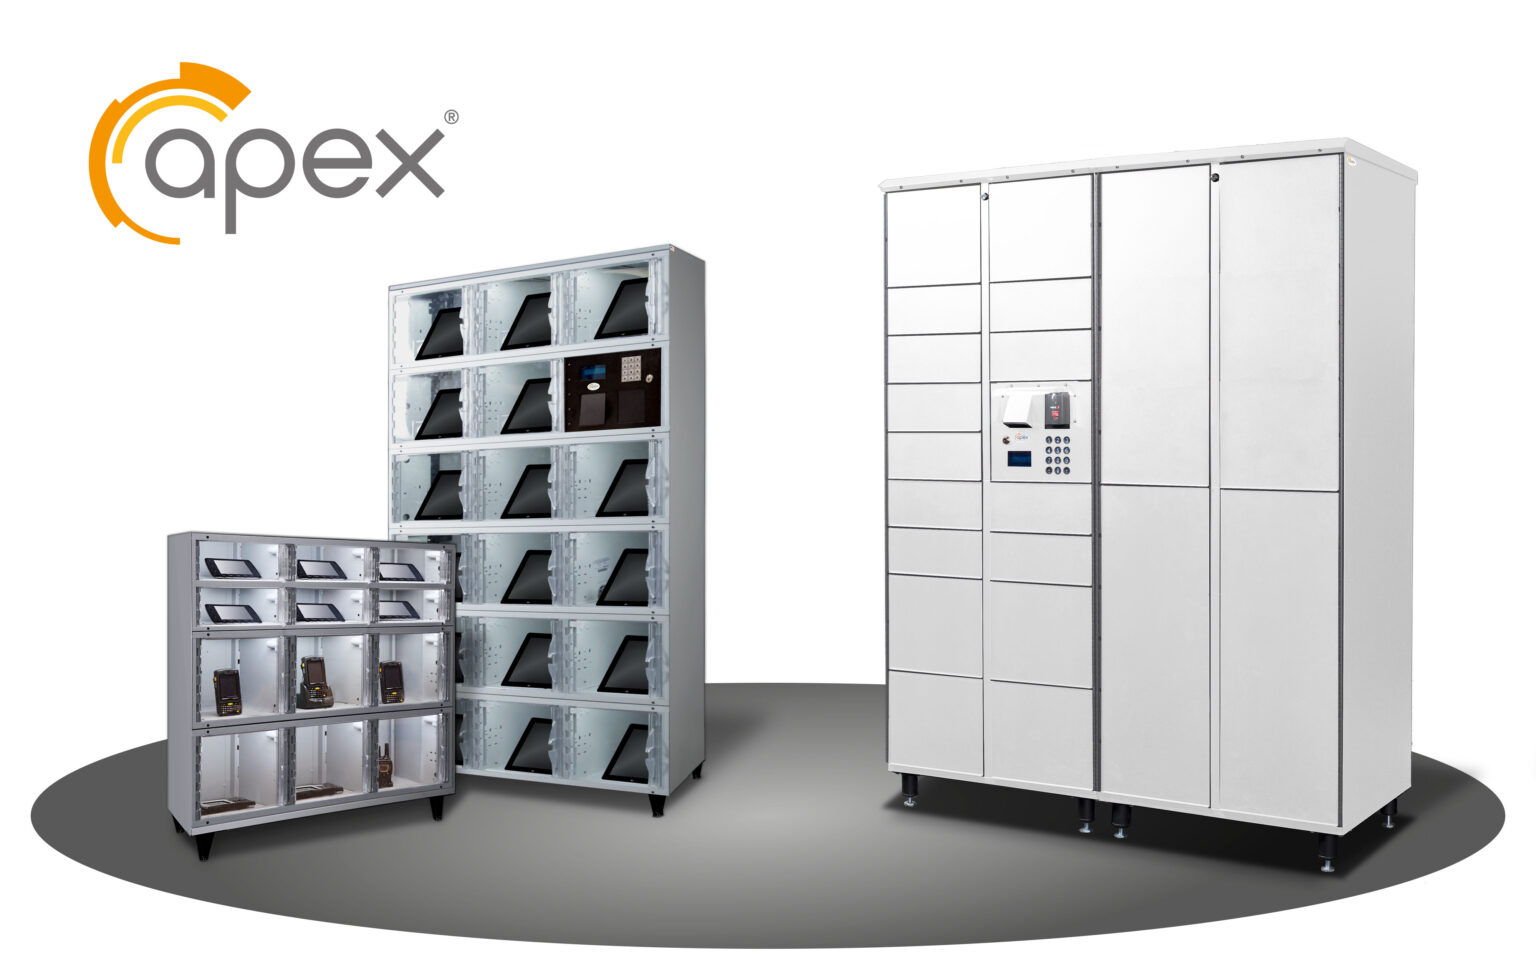 5. Ricoh grows Smart Locker capabilities with acquisition of Apexs European business tcm100 52934